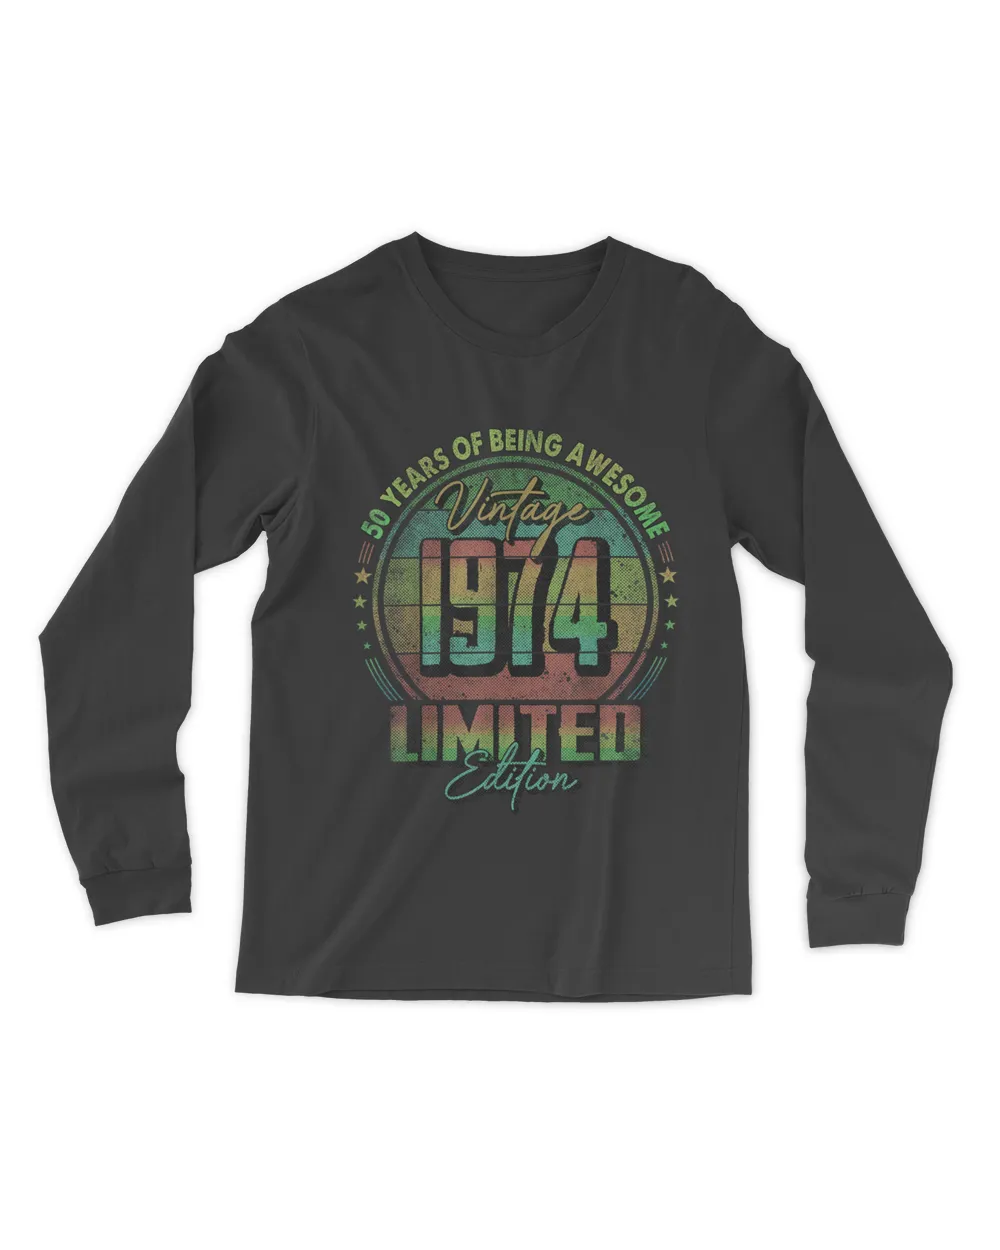 Vintage 1974 Limited Edition Shirt 50 year old 50th Birthday T-Shirt